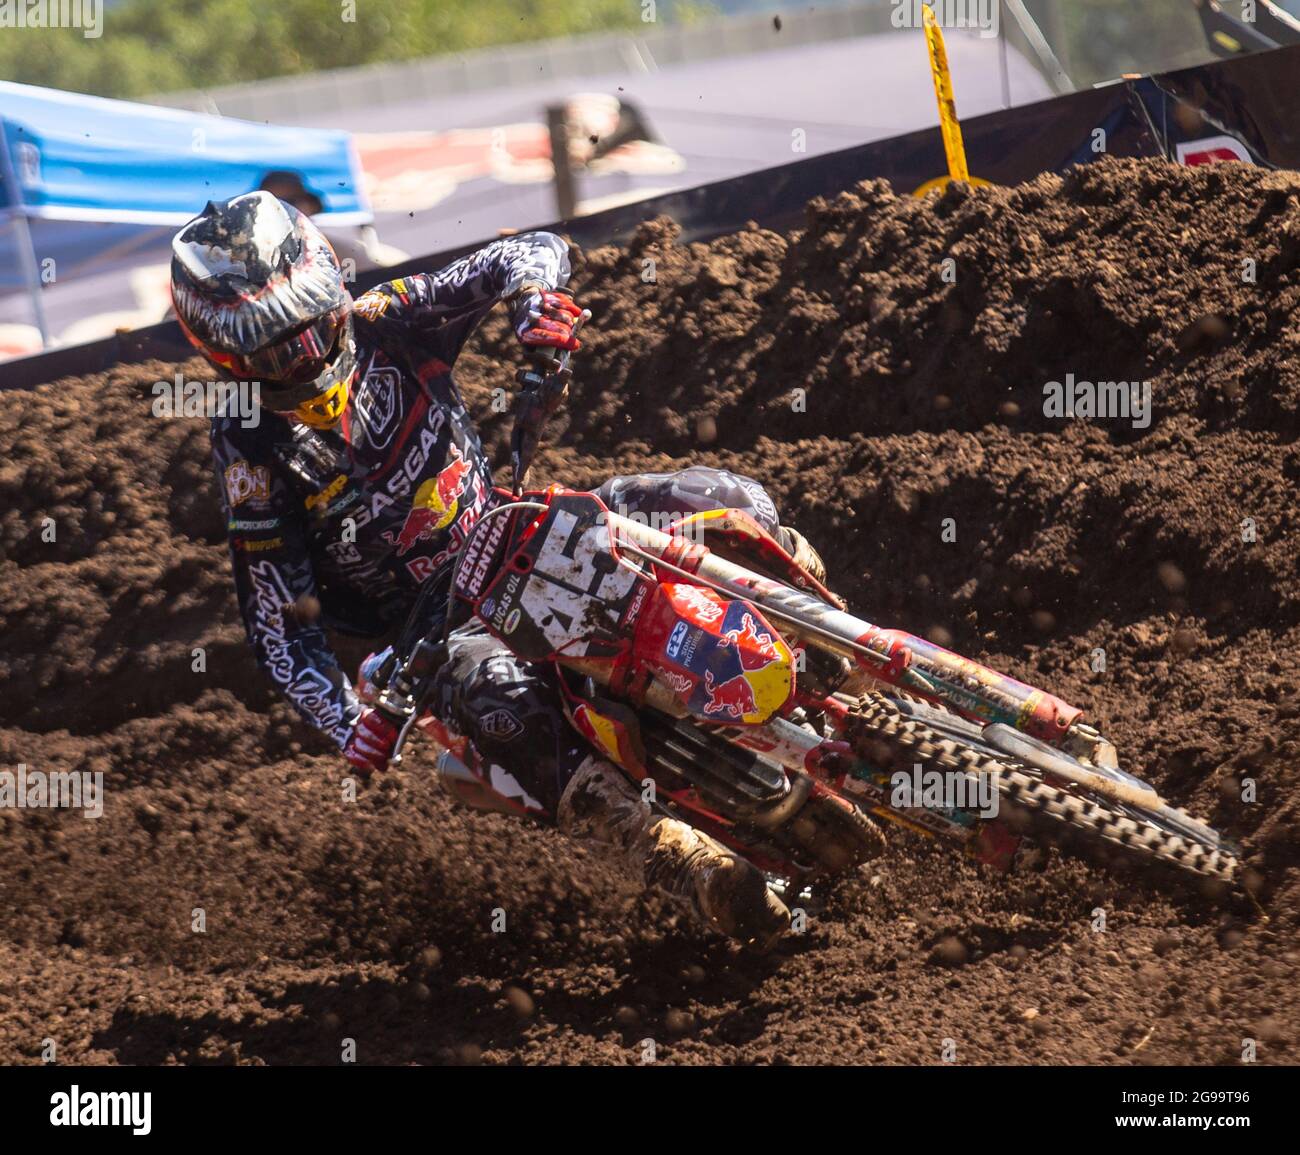 JUL 24 2021 Washougal, WA USA Troy Lee Designs/ Red Bull/ GASGAS Factory Racing Pierce Brown(45) coming out of turn 14 during the Lucas Oil Pro Motocross Washougal Championship 250 class at Washougal MX park Washougal, WA Thurman James/CSM Stock Photo